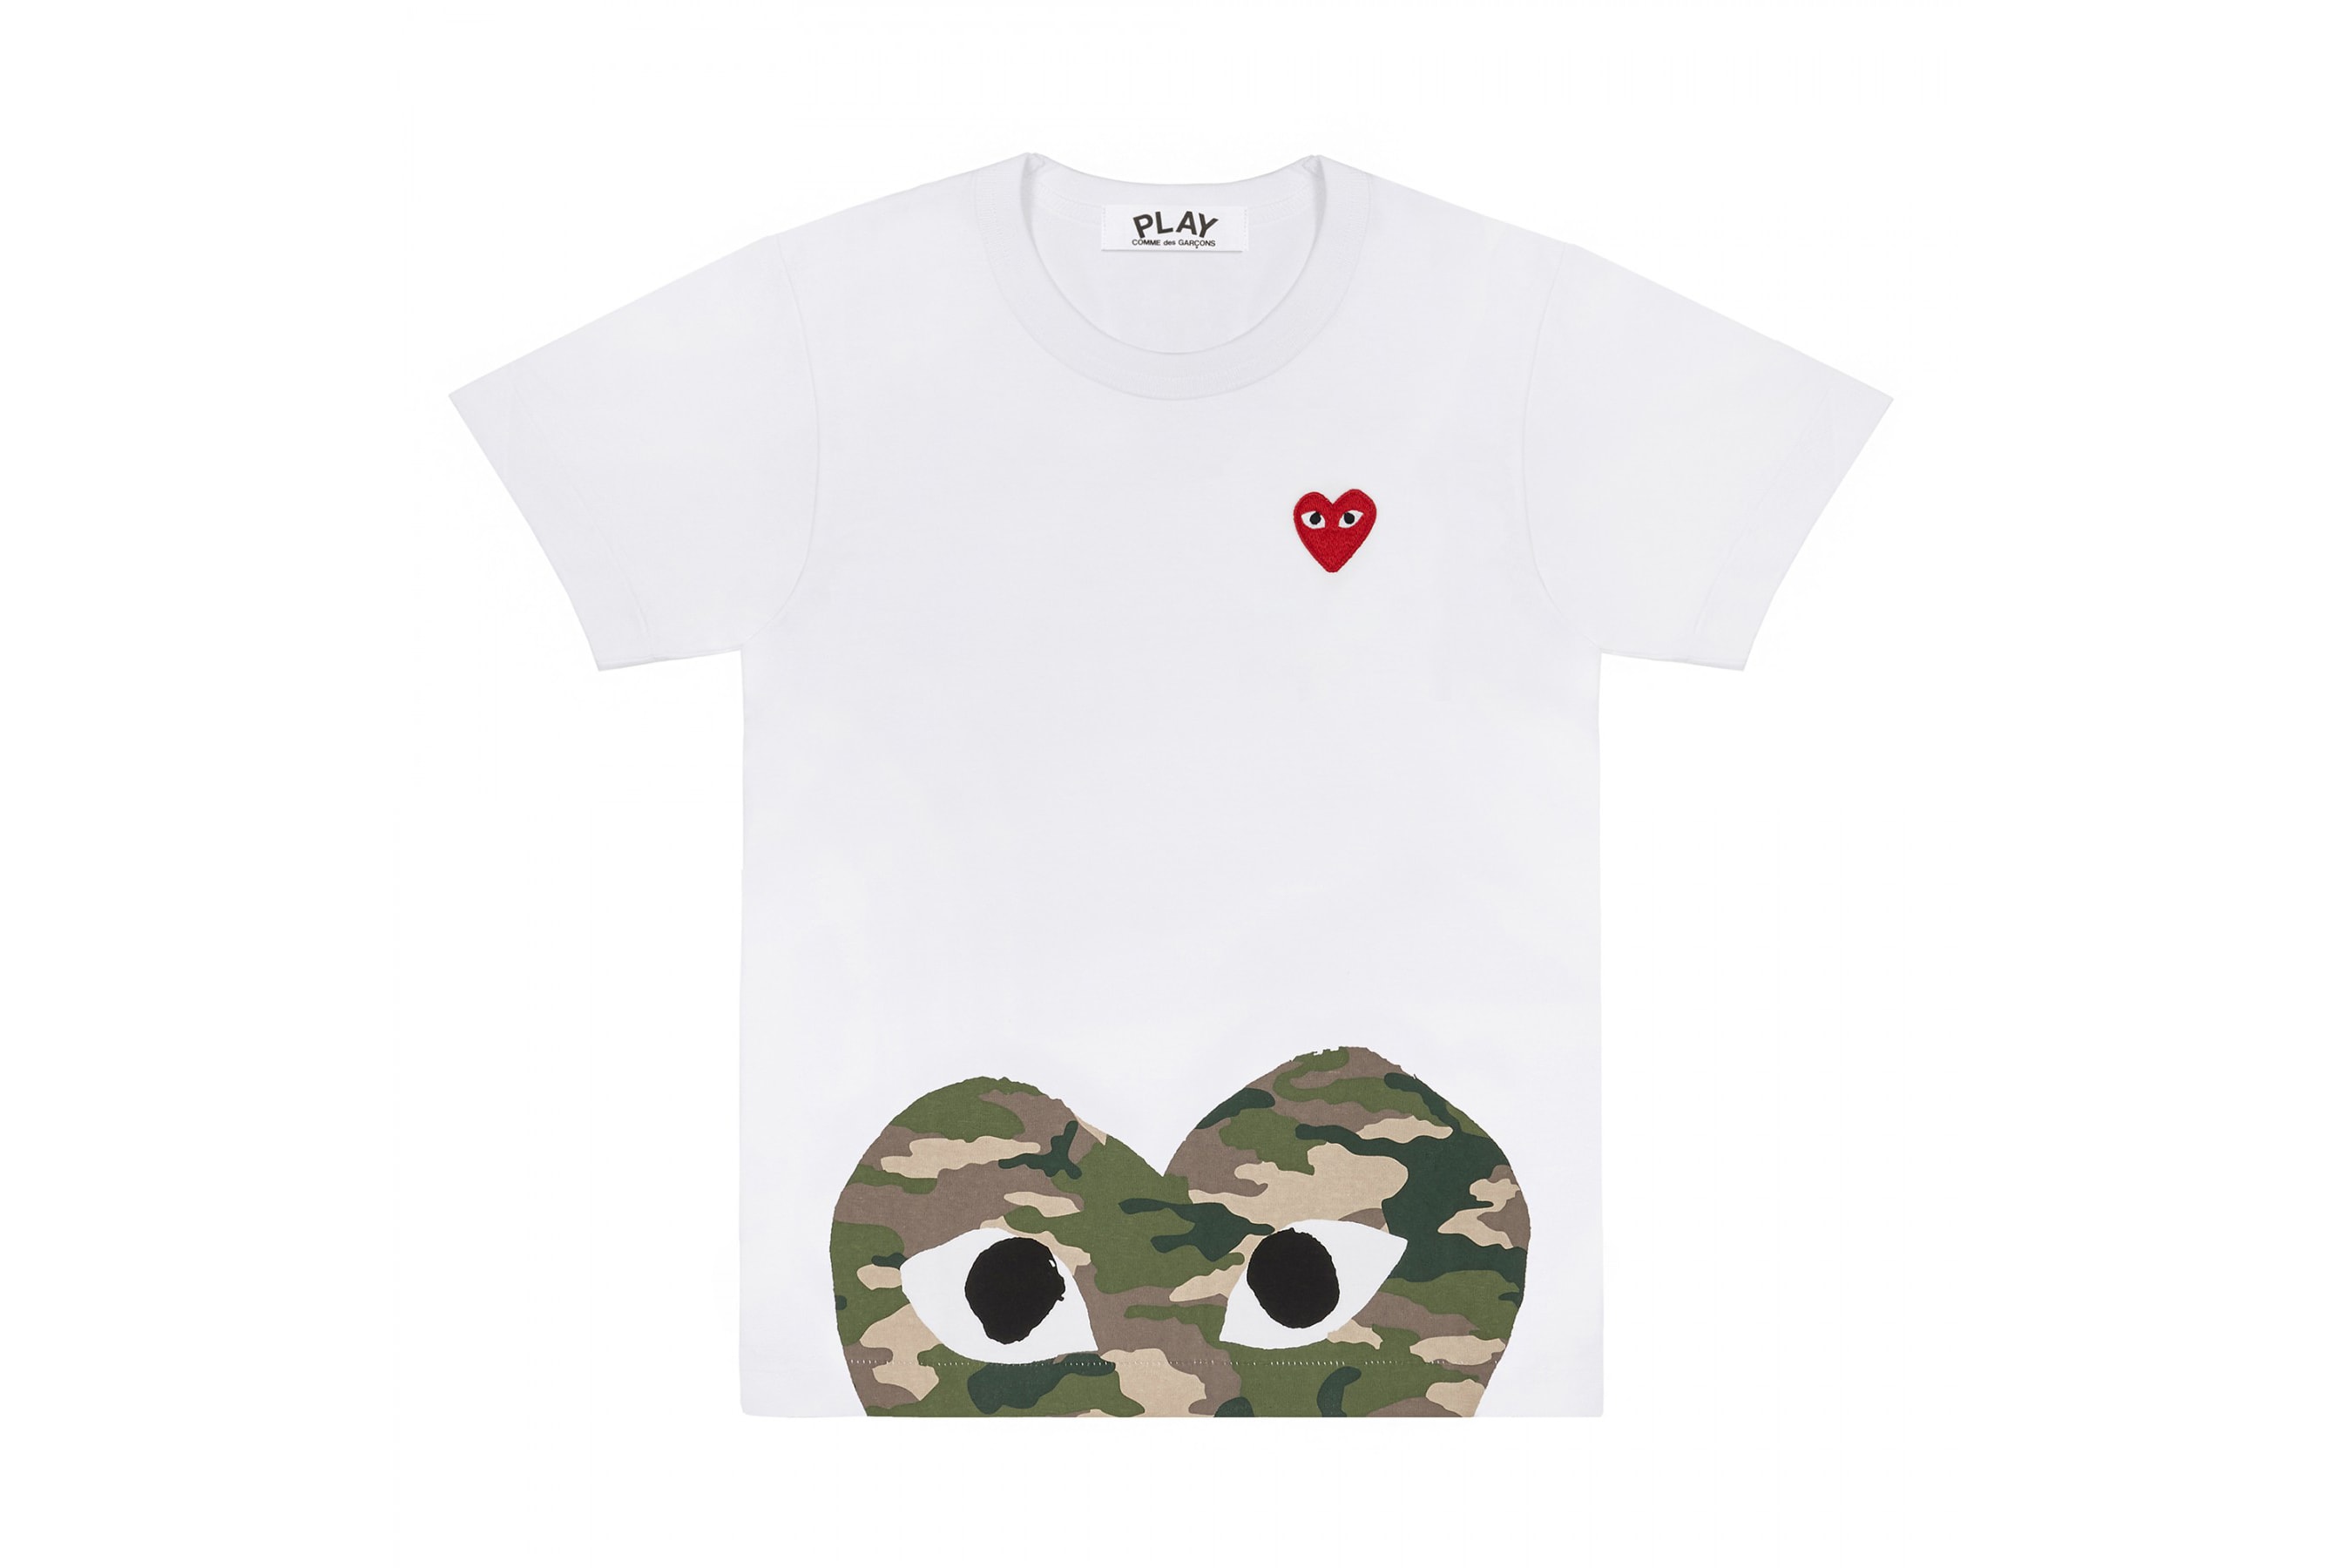 COMME des GARÇONS PLAY Camouflage T-shirts Dover Street Market Where To Buy Heart Logo